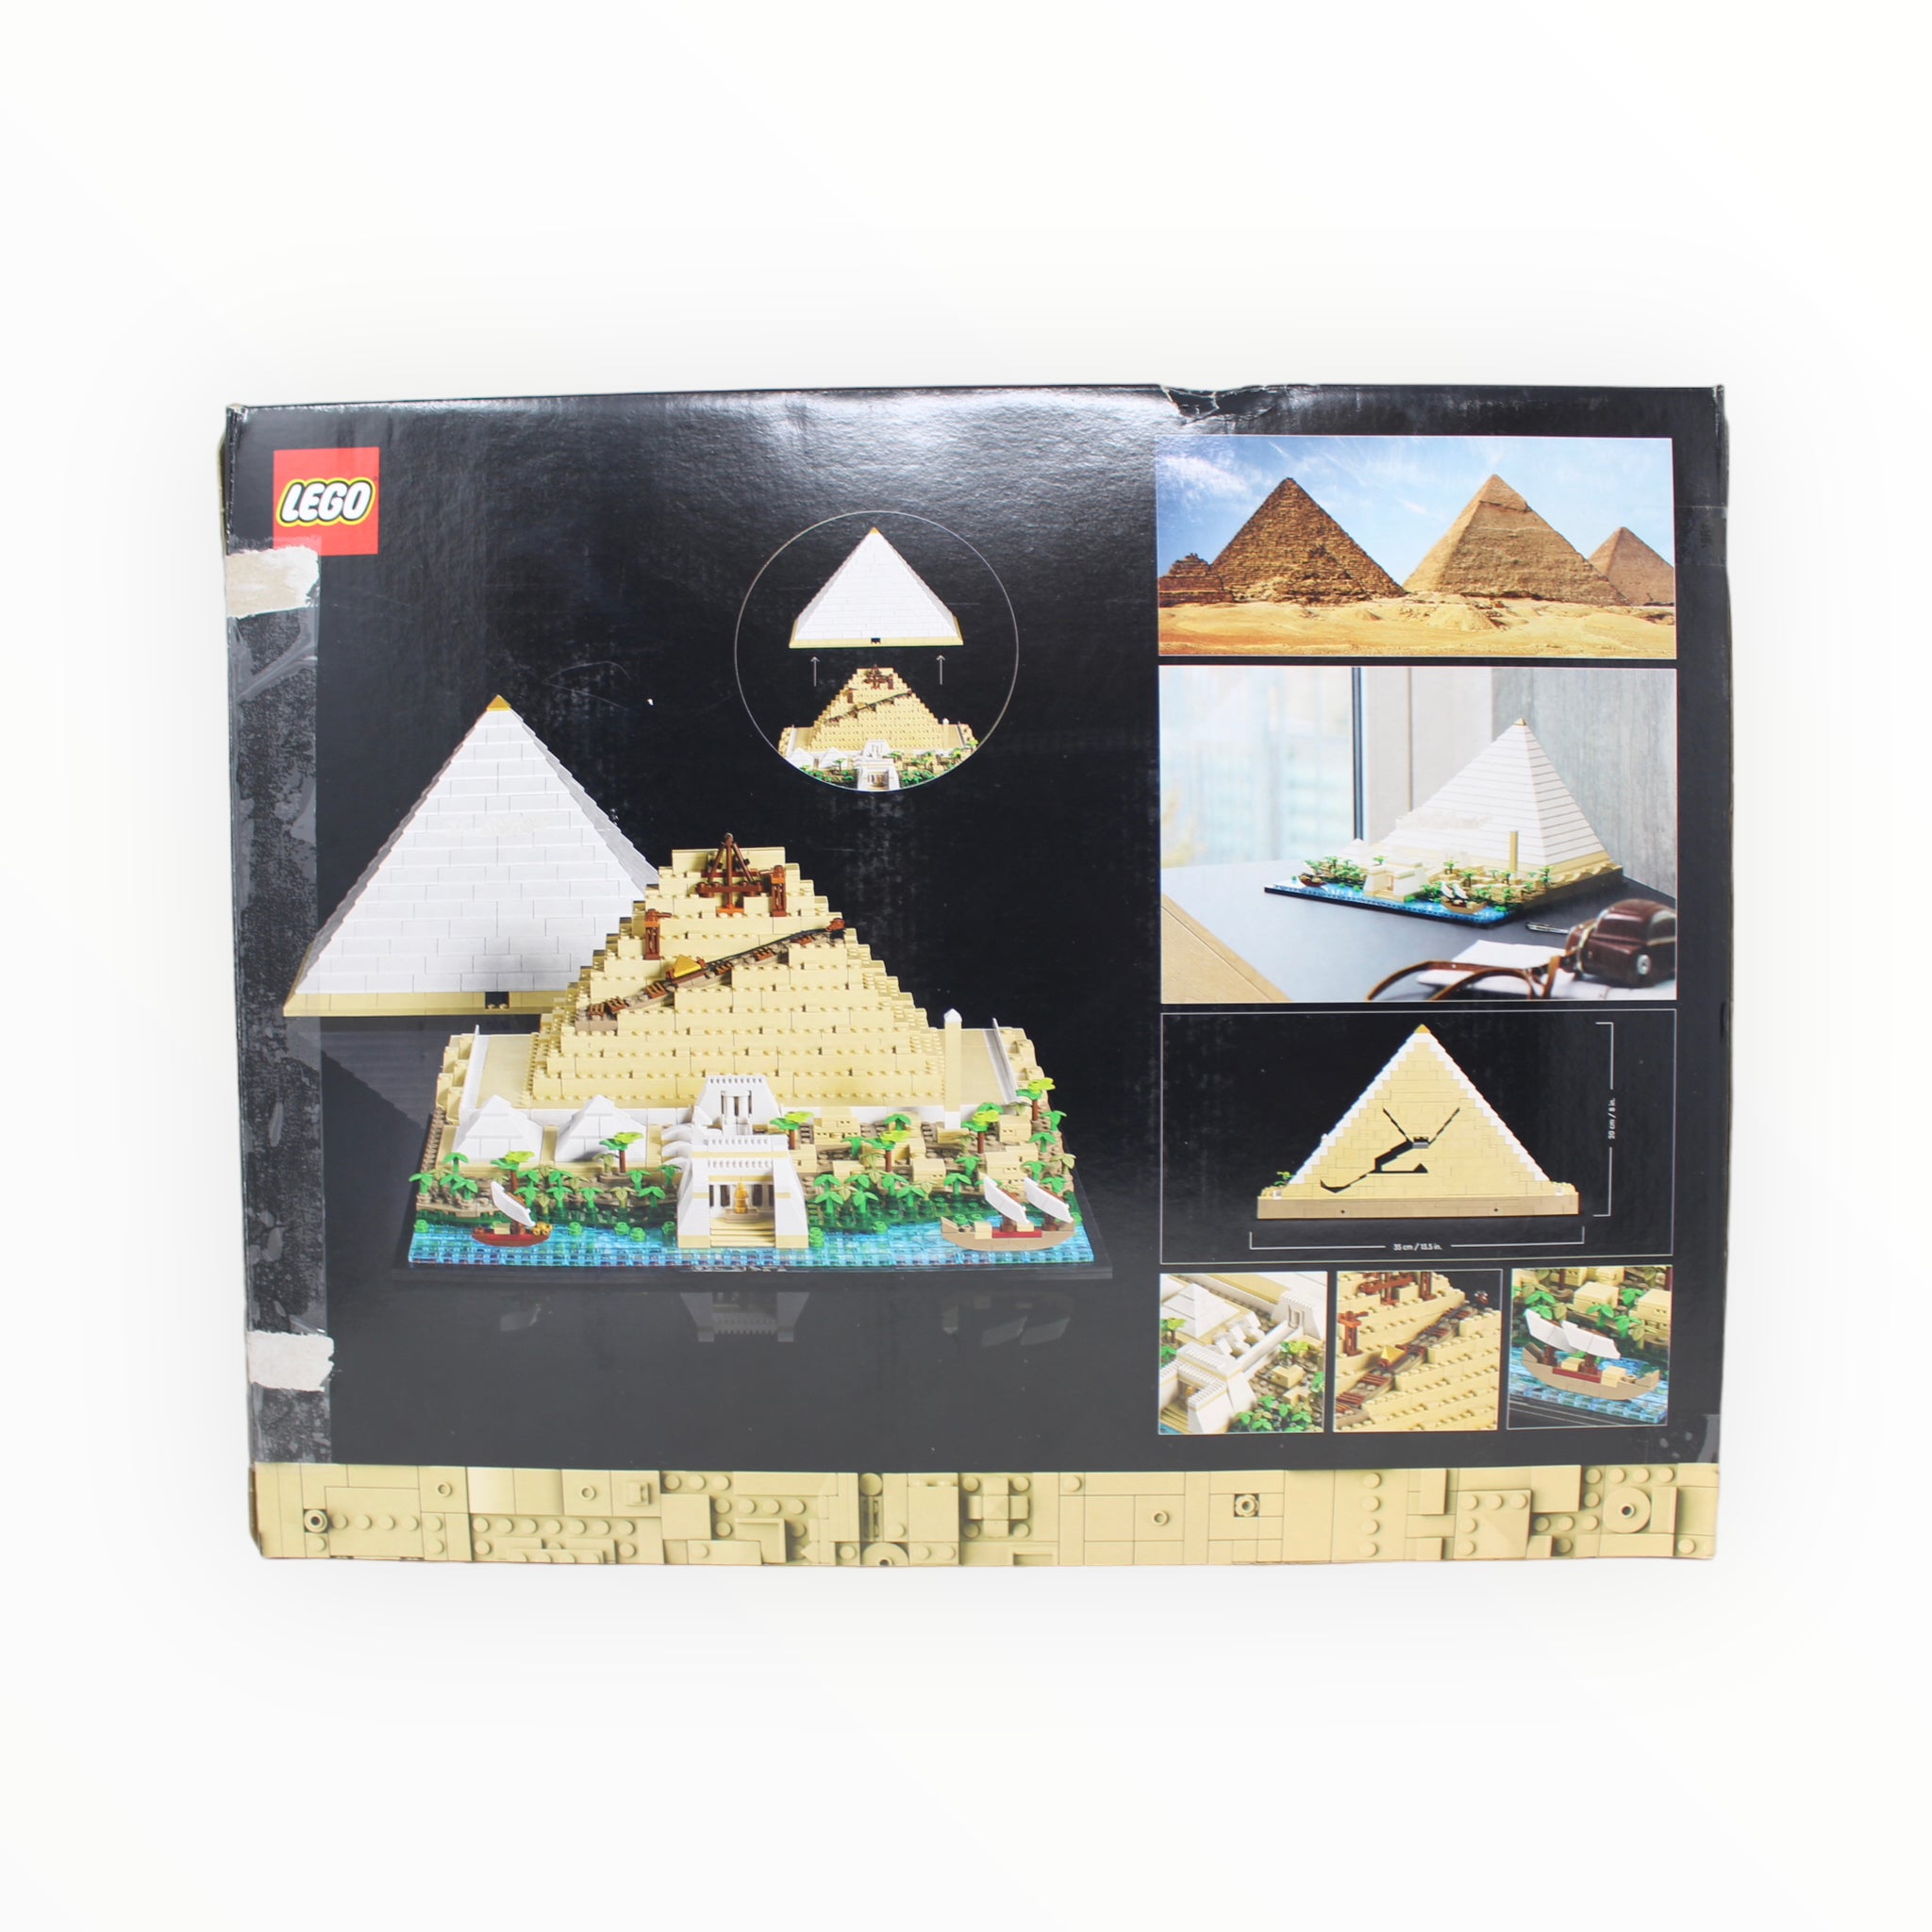 Certified Used Set 21058 Architecture The Great Pyramid of Giza (bags 4-8 still sealed)